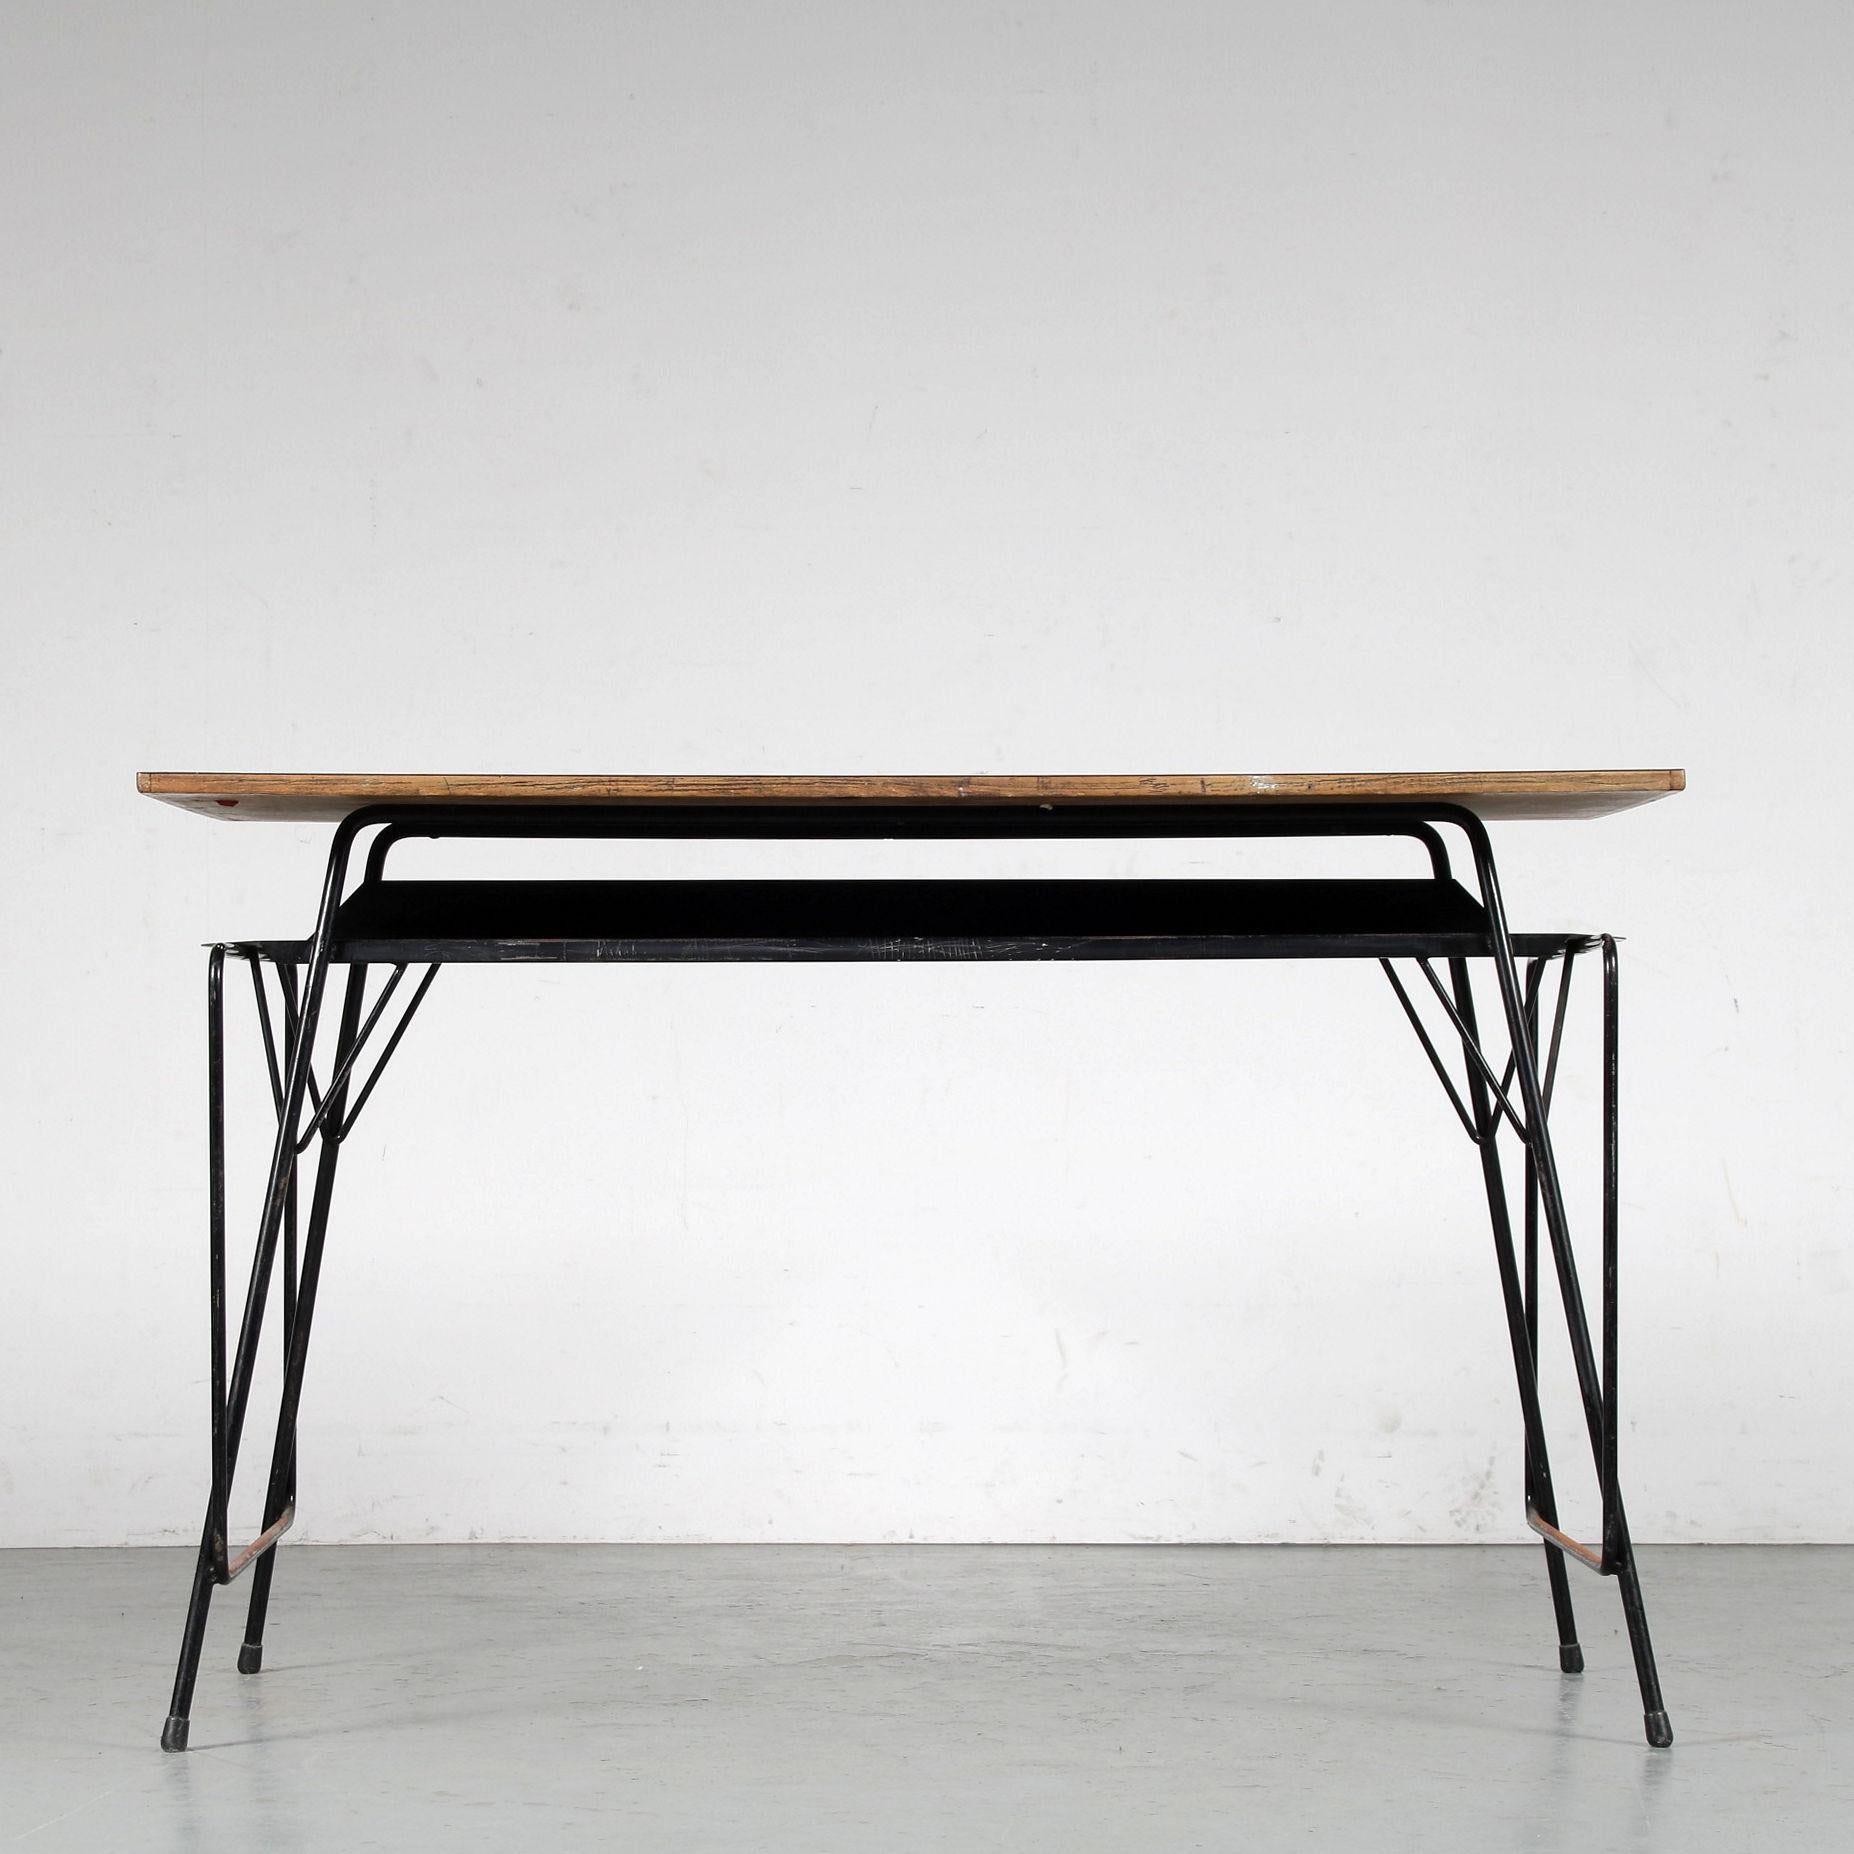 A beautiful teacher’s desk designed by Willy van der Meeren, manufactured by Tubax in Belgium around 1950.

The table has a thin black lacquered metal base with a grey formica top. Underneath the top, there’s the black metal shelf that functions